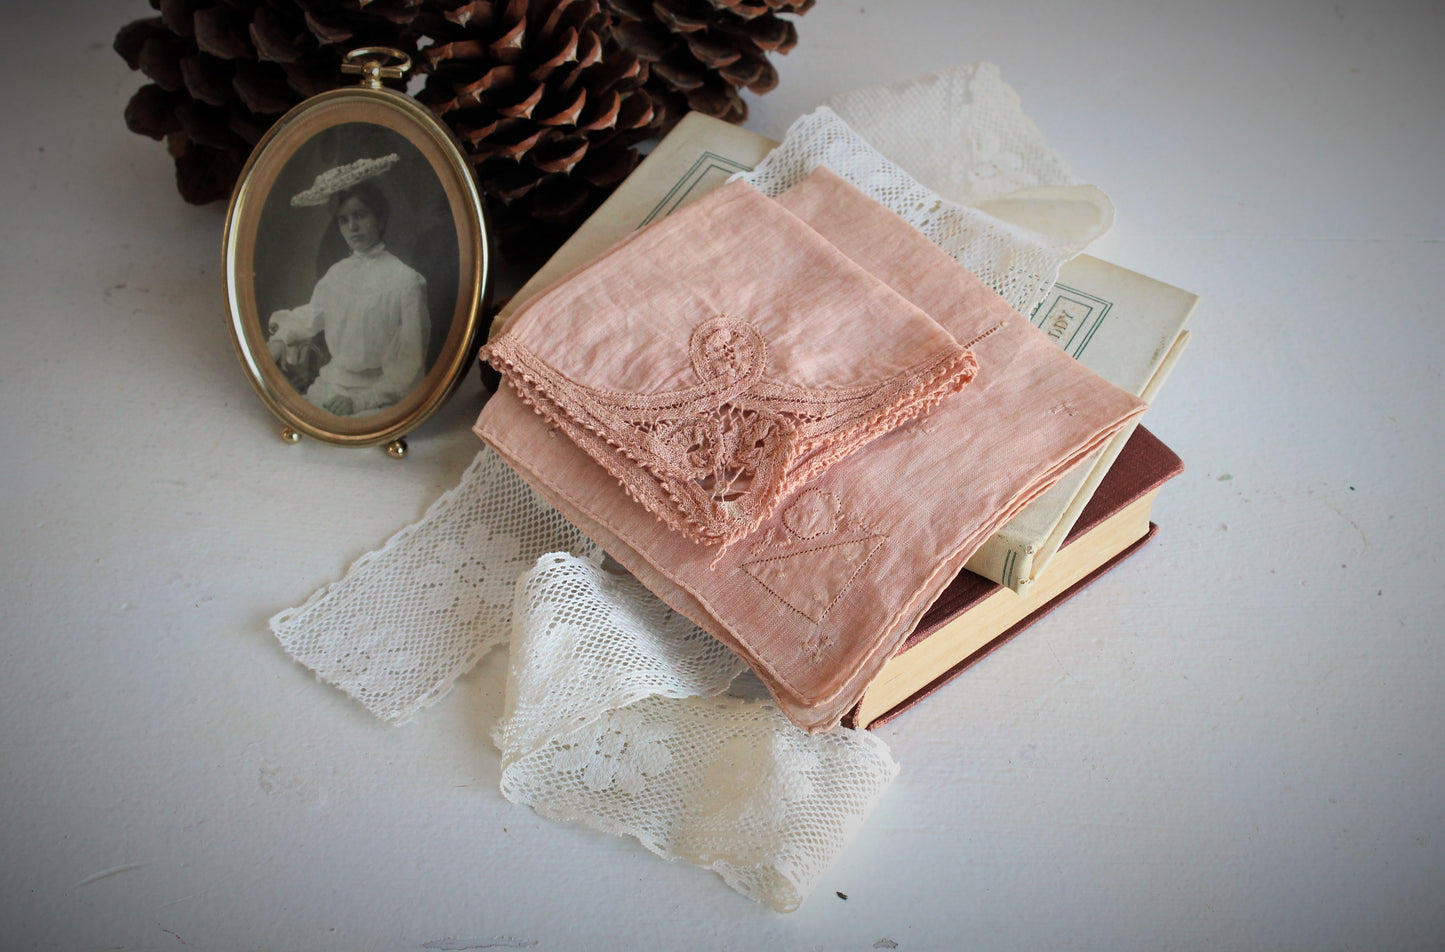 Set of Two Hand Plant Dyed Vintage Handkerchiefs in Salmon Pink